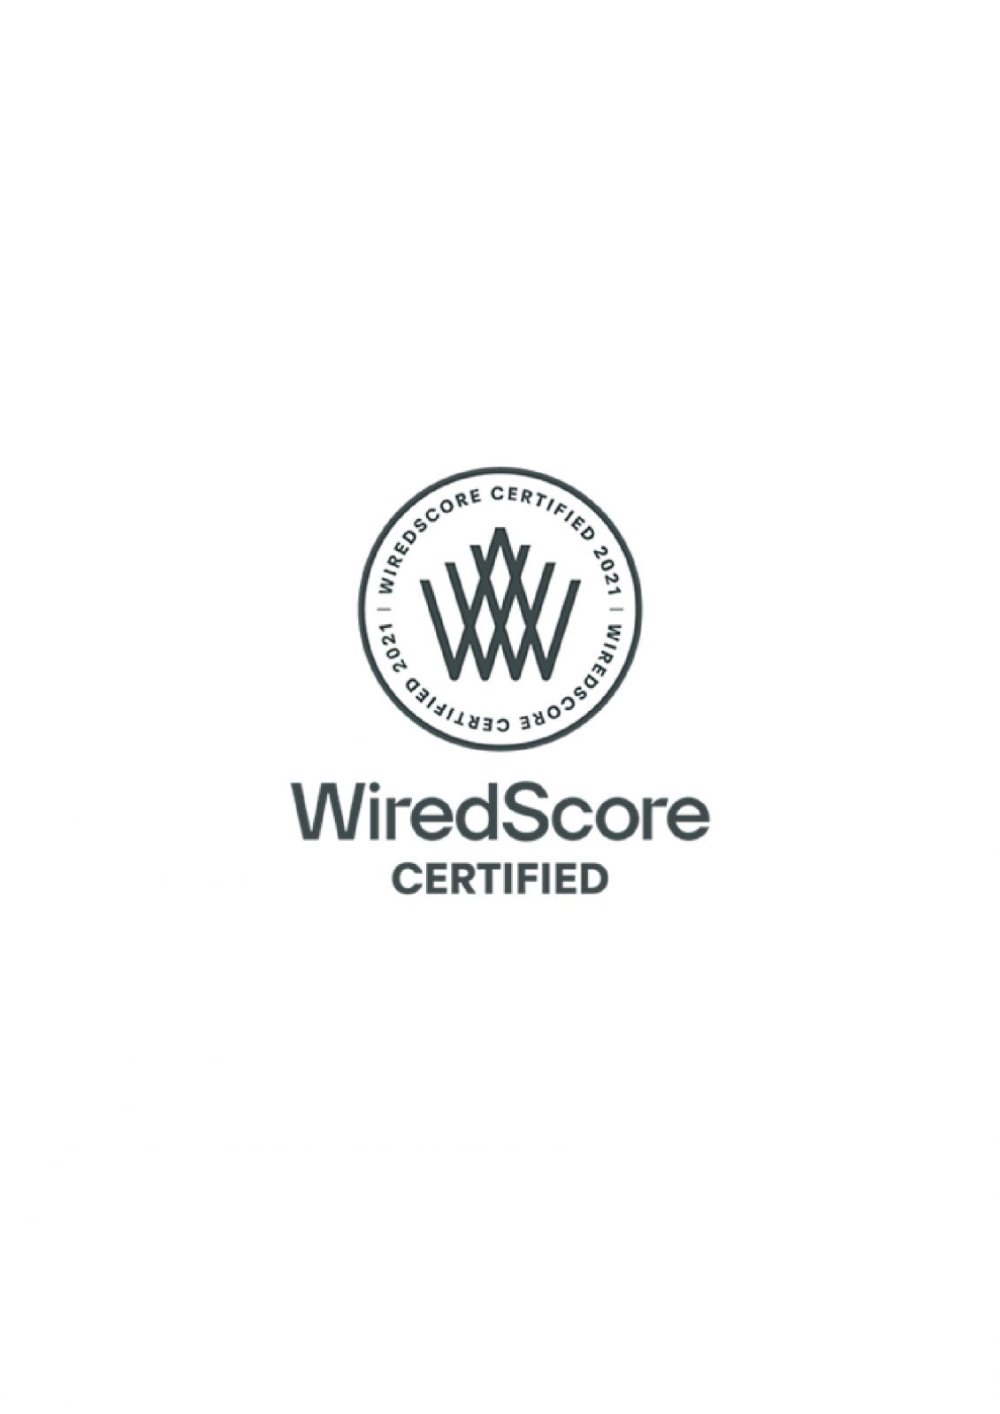 PGI ENGINEERING now has available the WiredScore certification for its customers